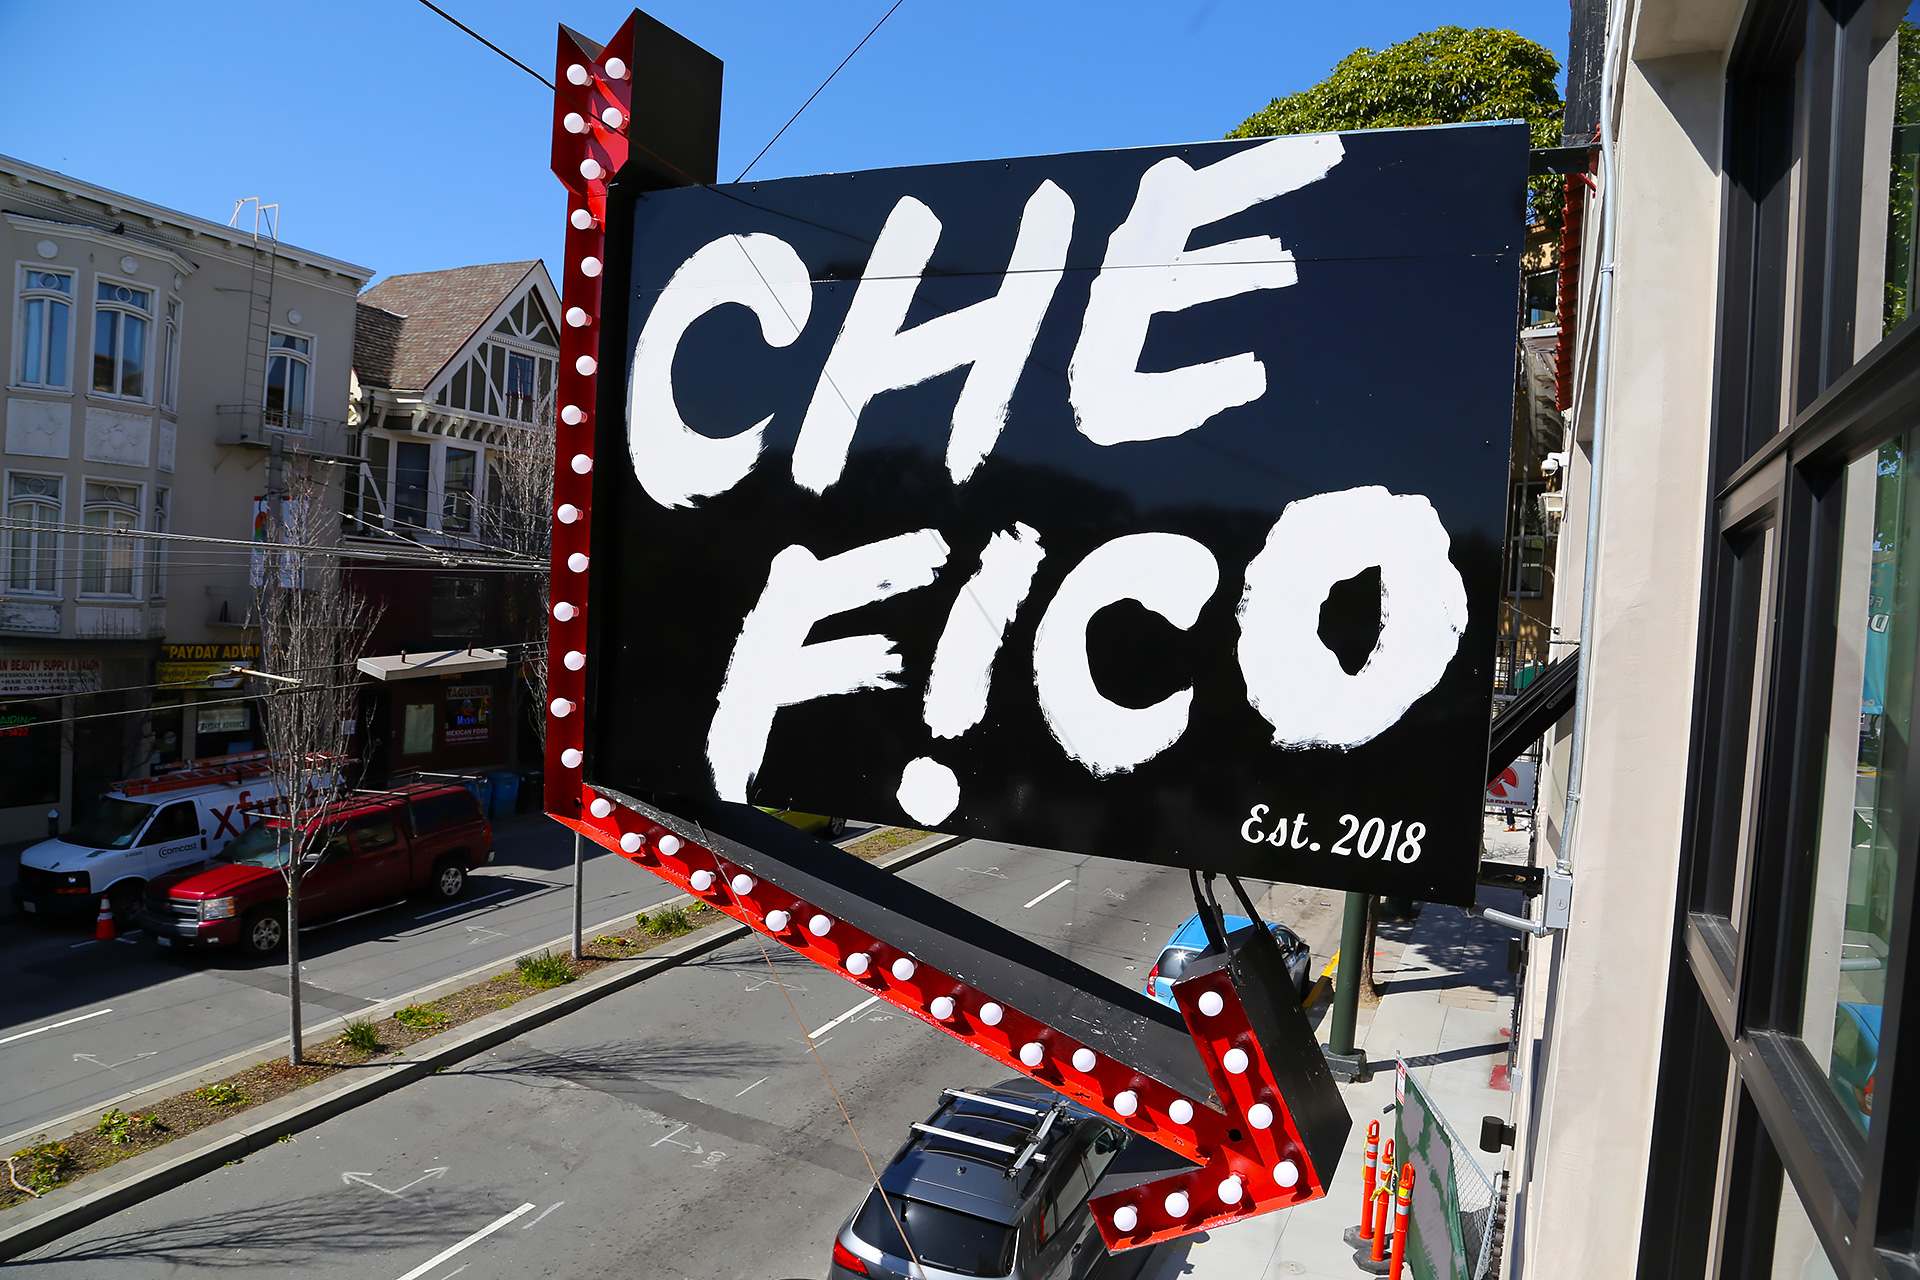 The cool Che Fico sign.